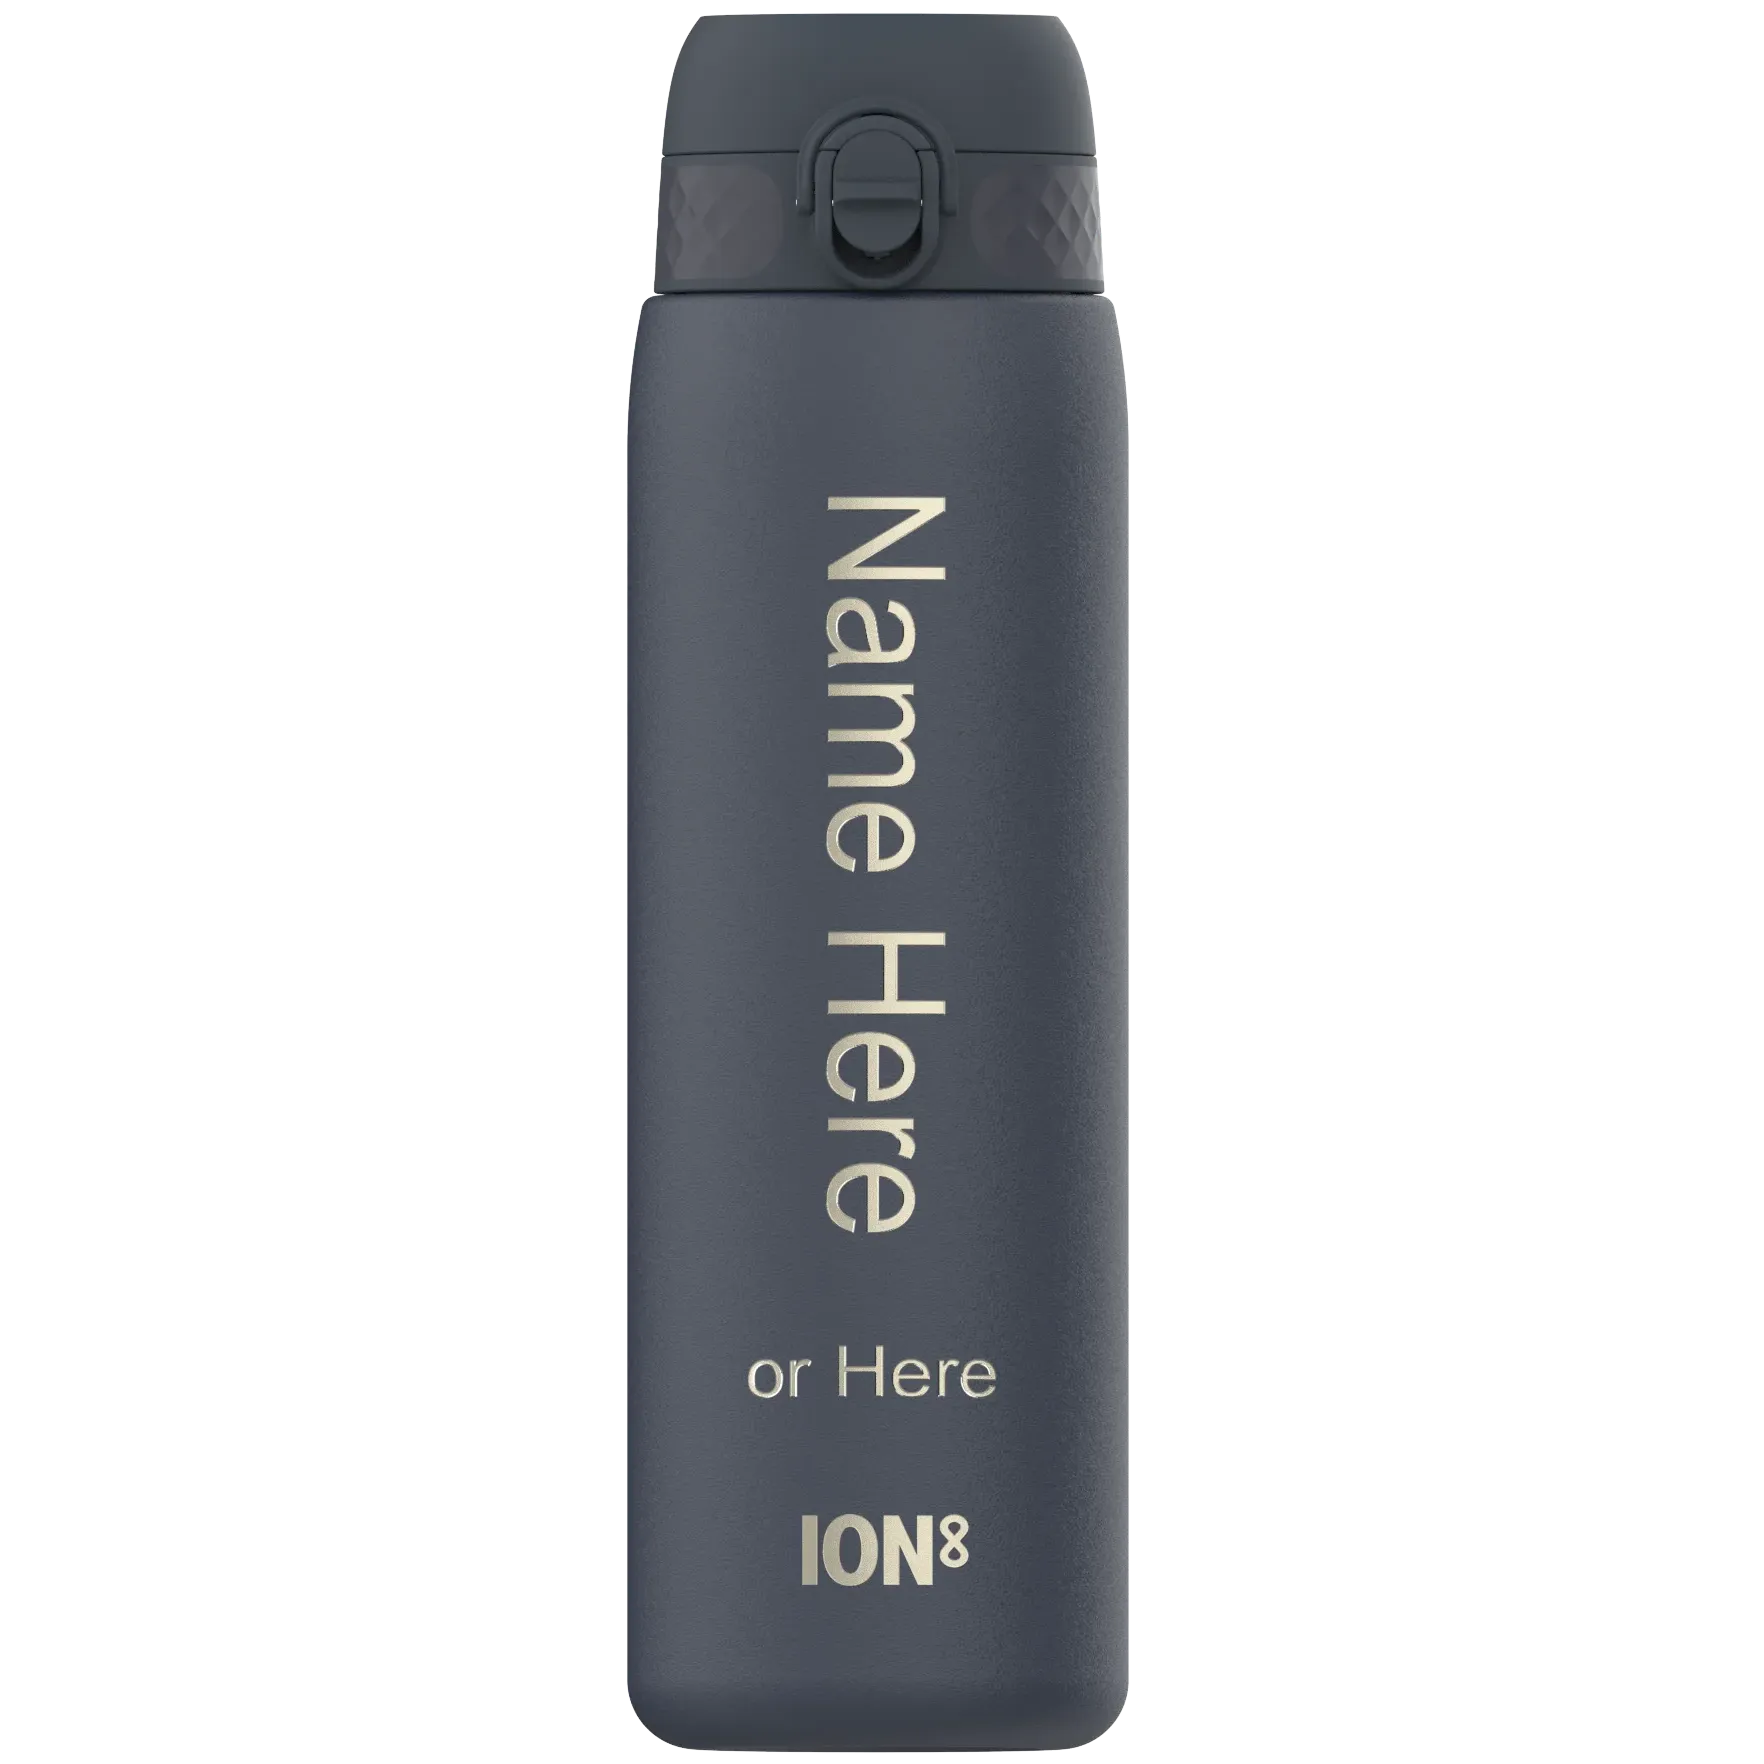 Insulated Water Bottles - Leak Proof 1 Litre Thermal Steel Water Bottle, Personalised, Vacuum Insulated, 1L